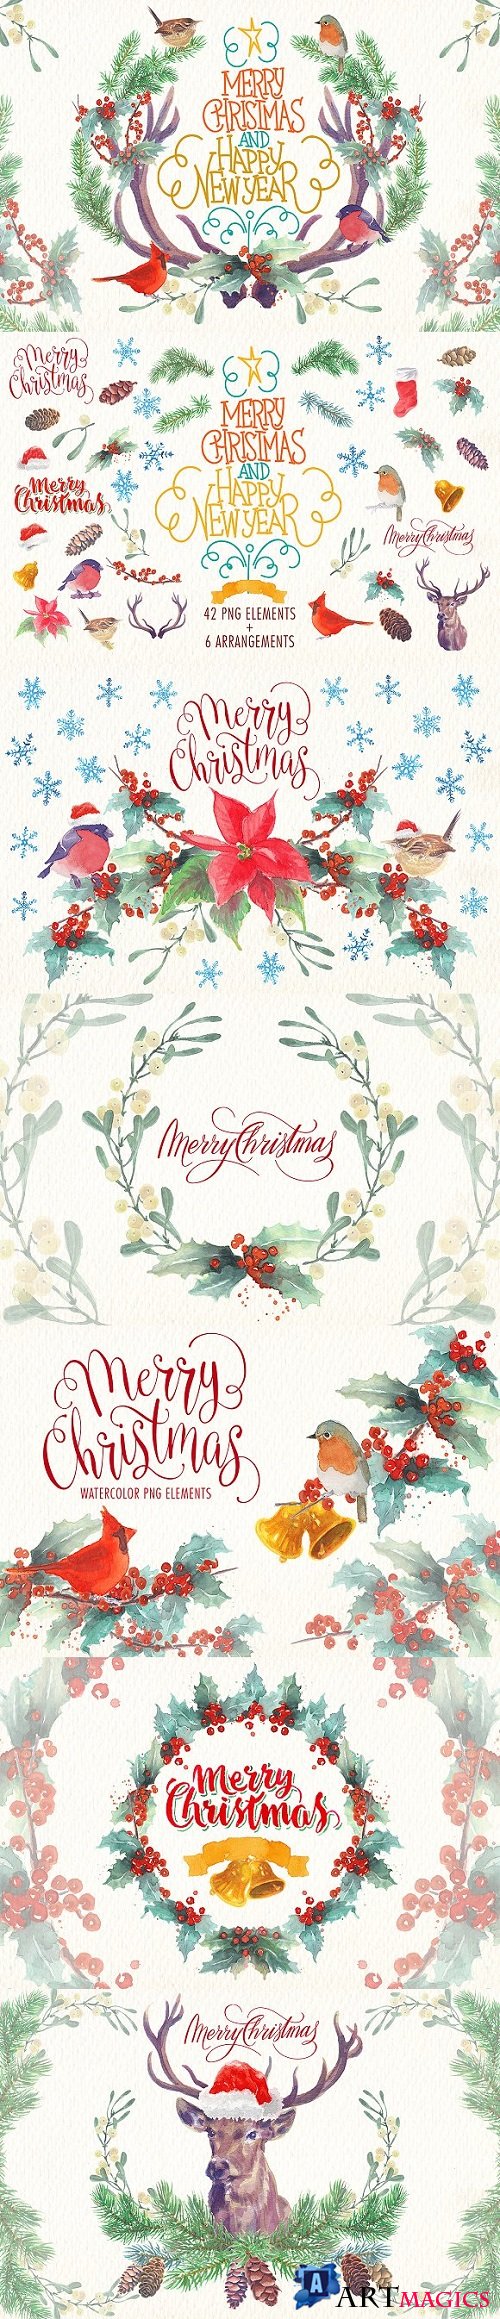 Watercolor christmas png elements 1949984